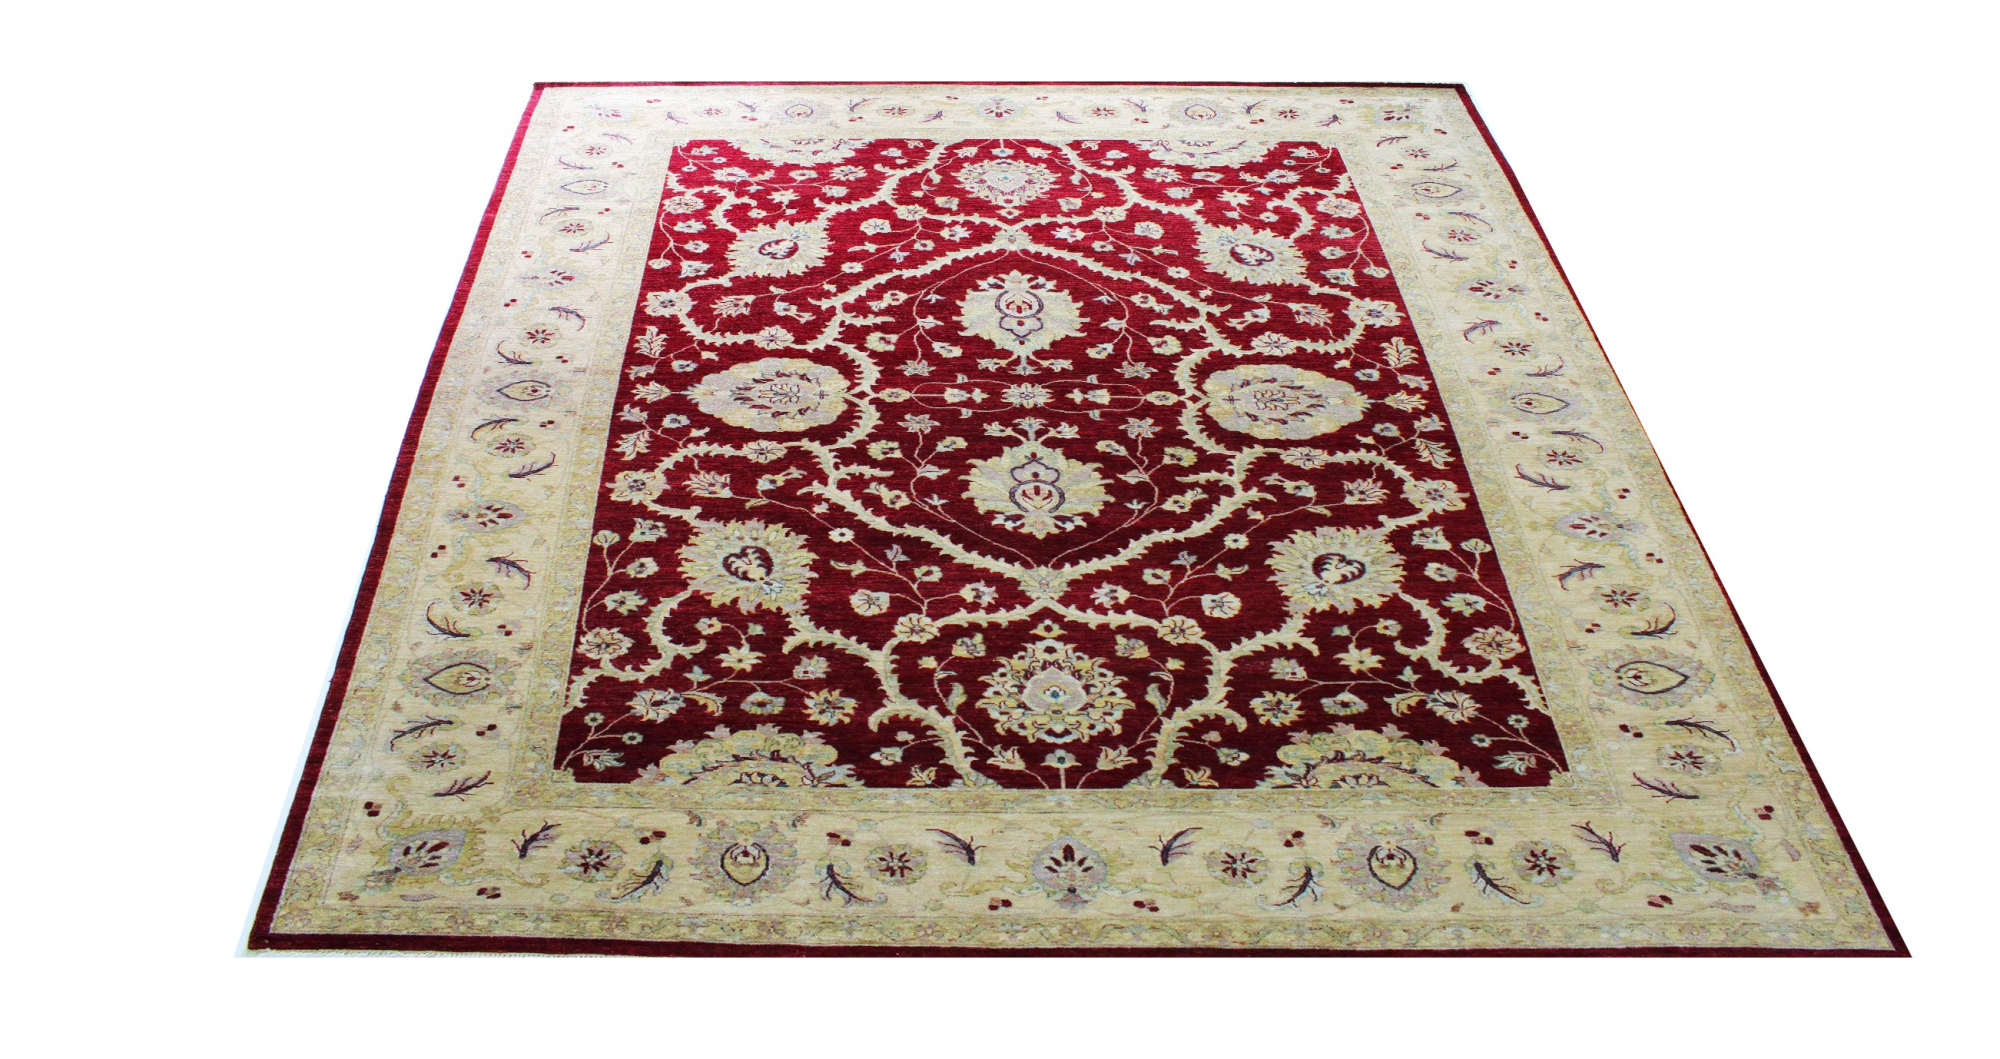 Area rug for living space and any room. Floor decor, rugs and carpets from Tabrizi Rugs. Chobi DC-BF - 9'0